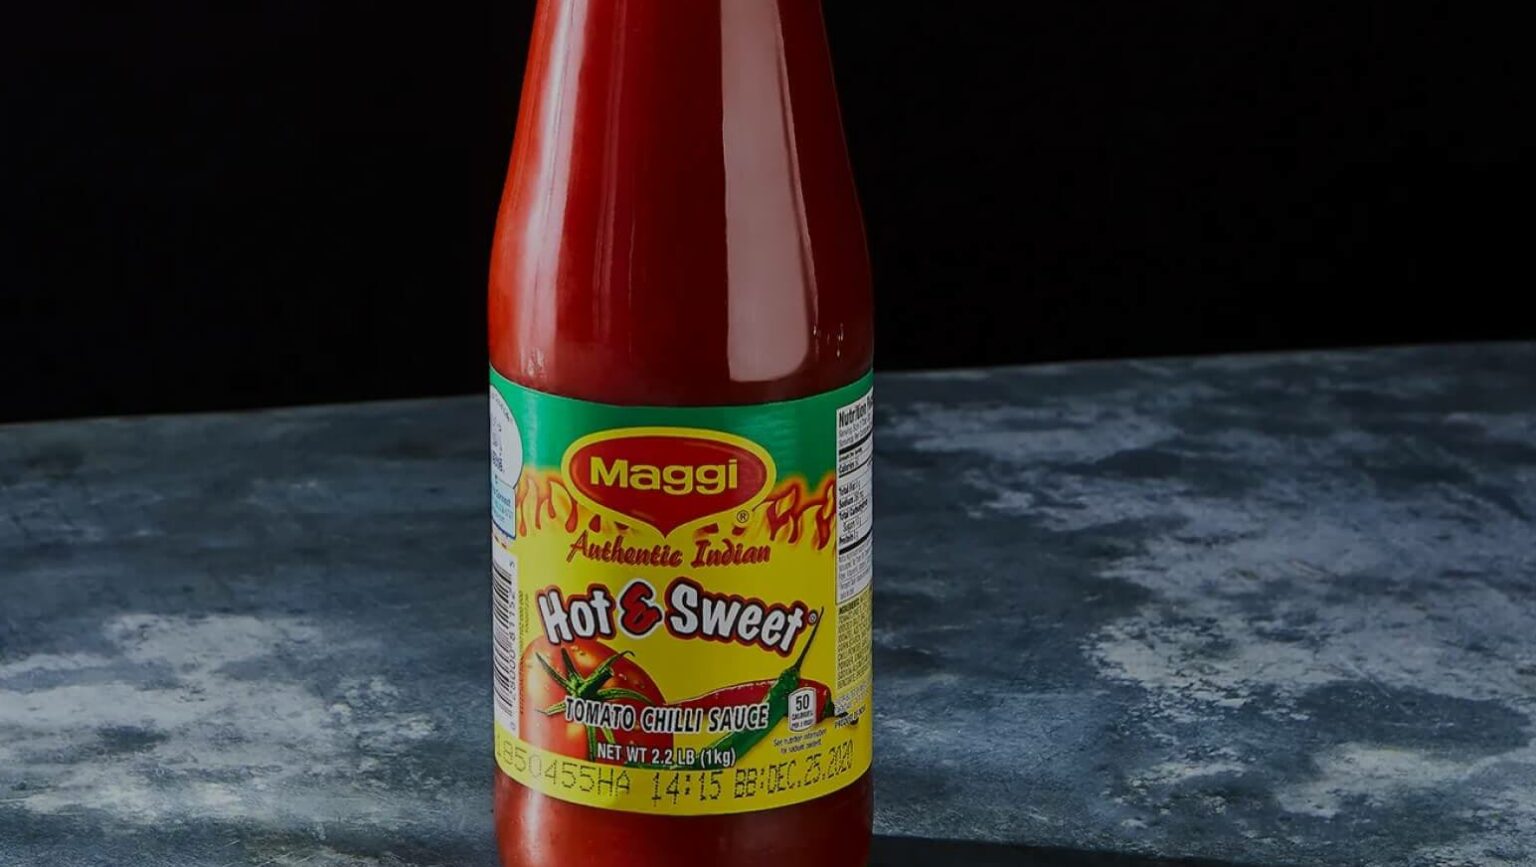 Brand Activism in Action: Maggi Ketchup'